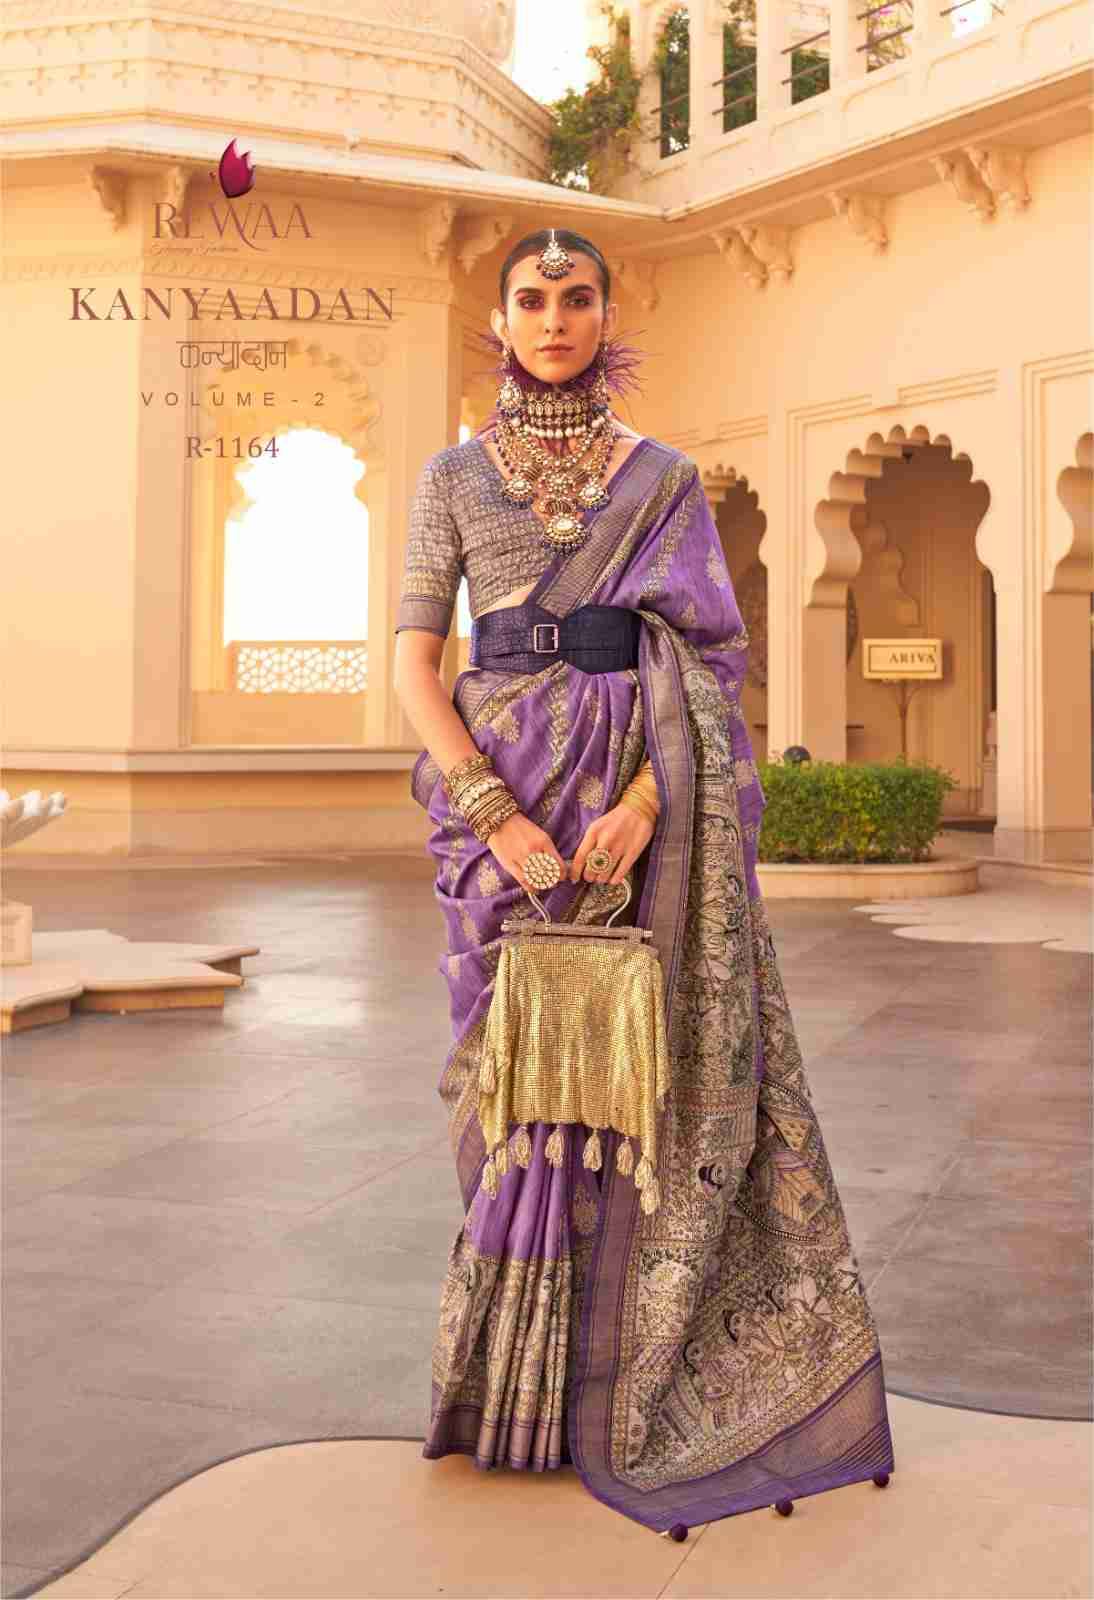 Kanyaadan Vol-2 By Rewaa 1156 To 1164 Series Indian Traditional Wear Collection Beautiful Stylish Fancy Colorful Party Wear & Occasional Wear Pure Silk Sarees At Wholesale Price